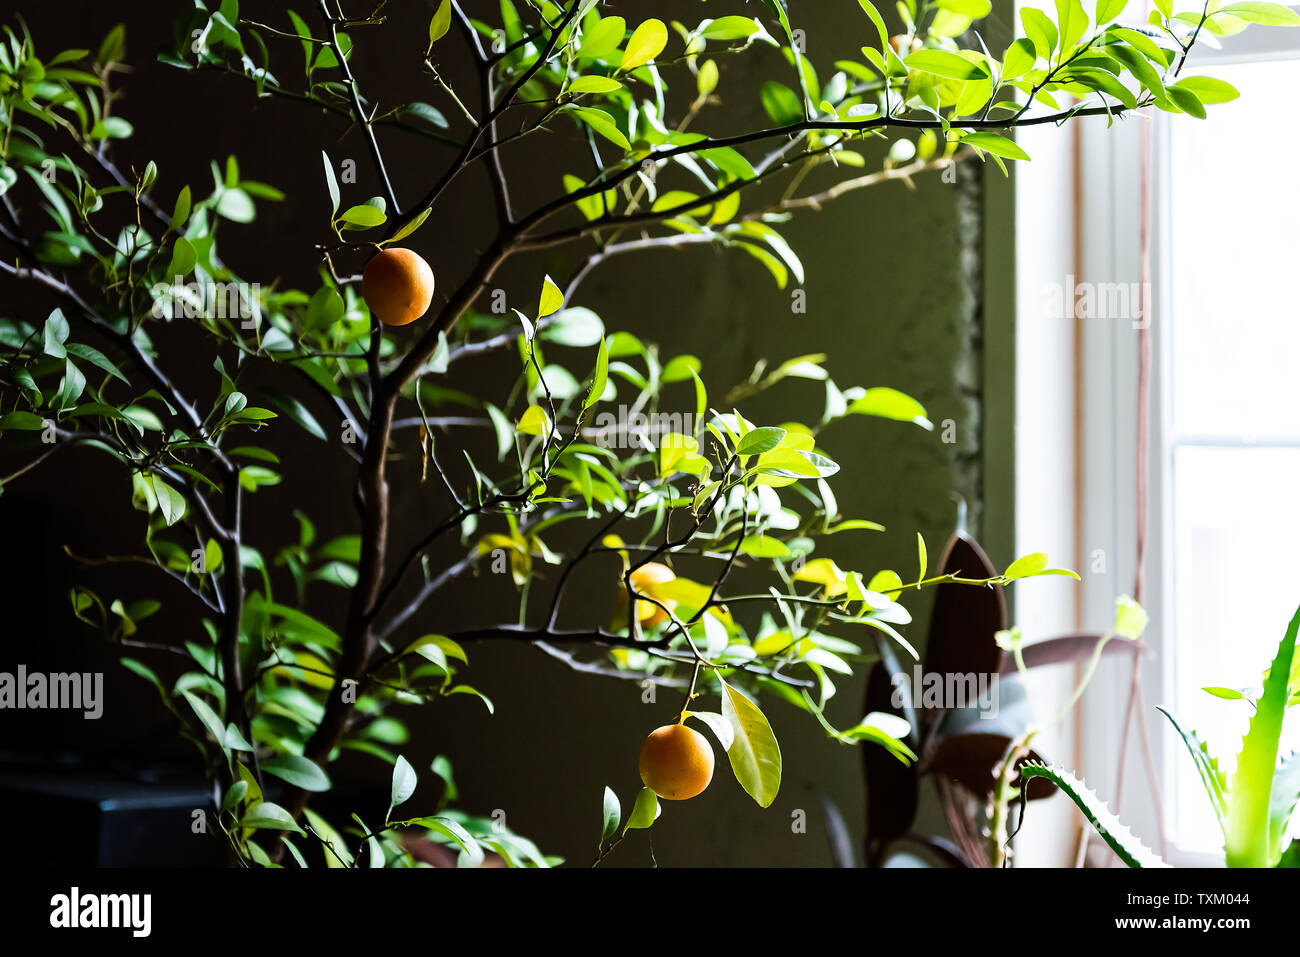 Calamondin plant with citrus and leaves in dark basement of house in winter with orange fruit Stock Photo